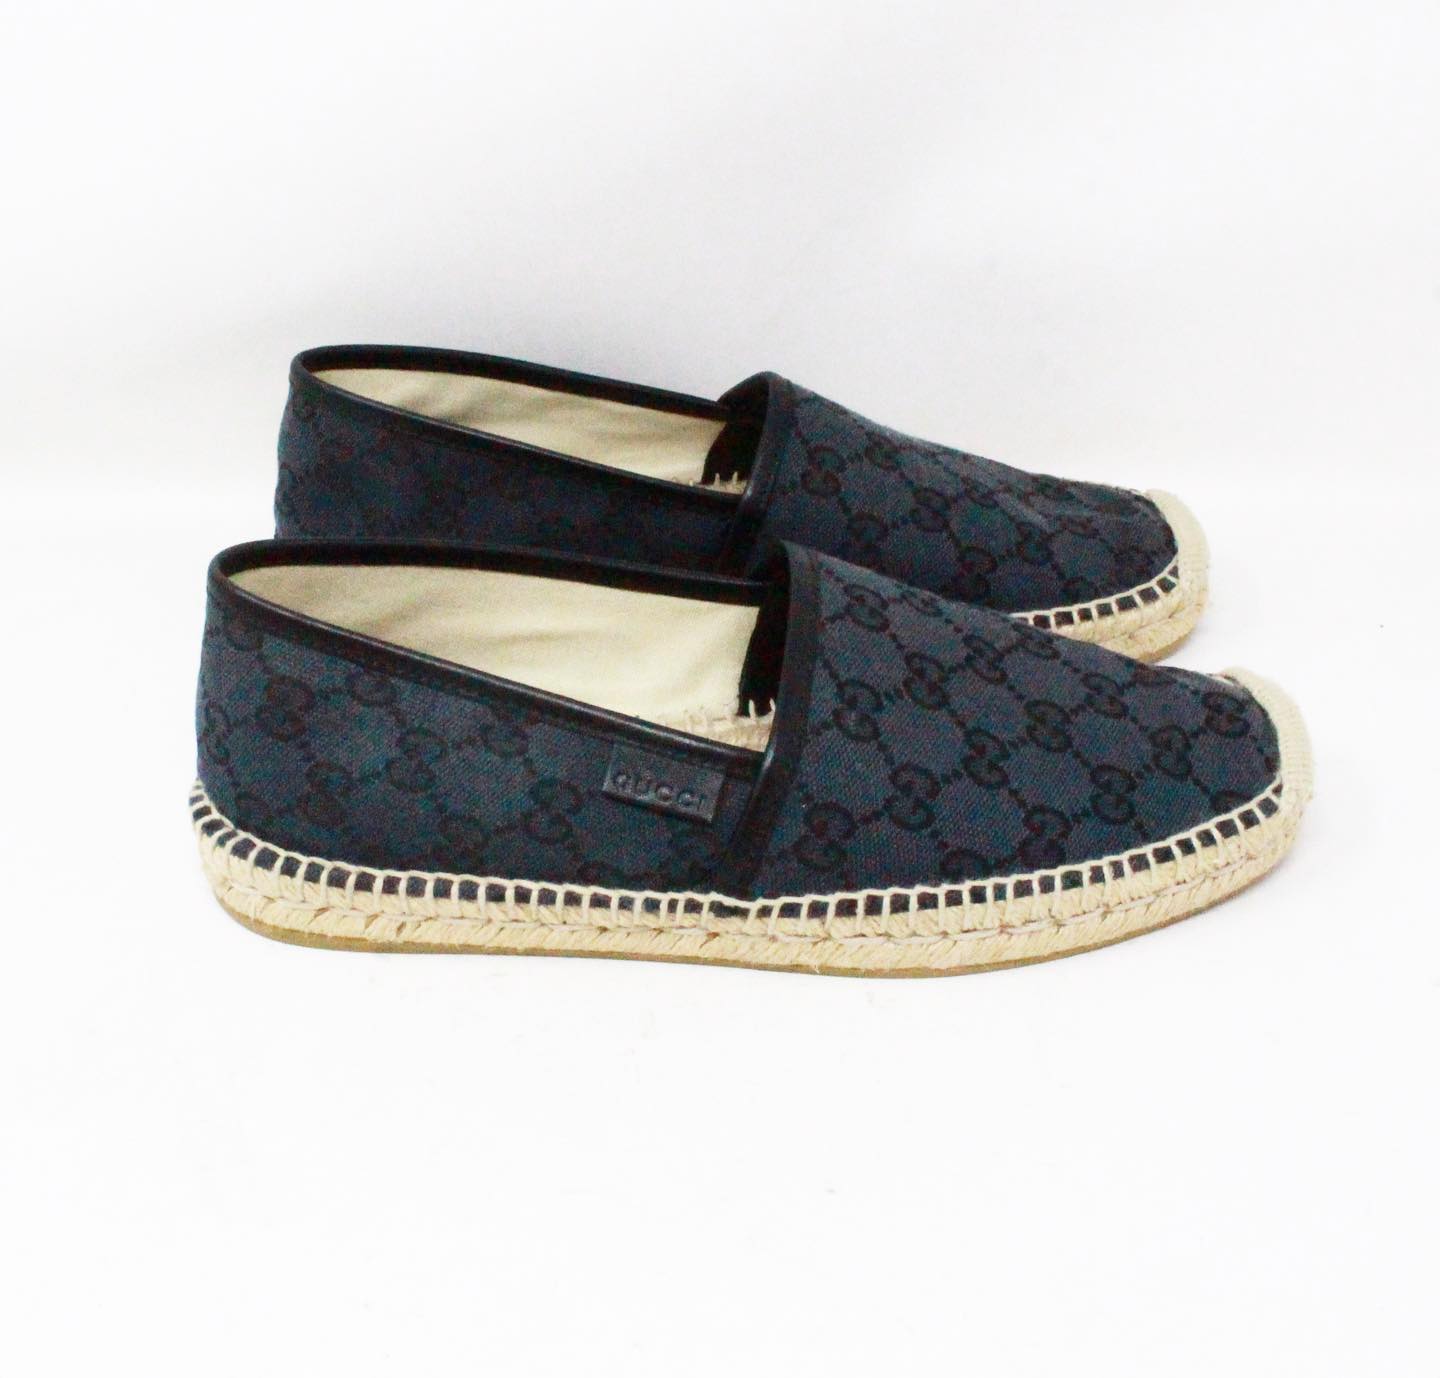 Espadrilles – ALL YOUR BLISS